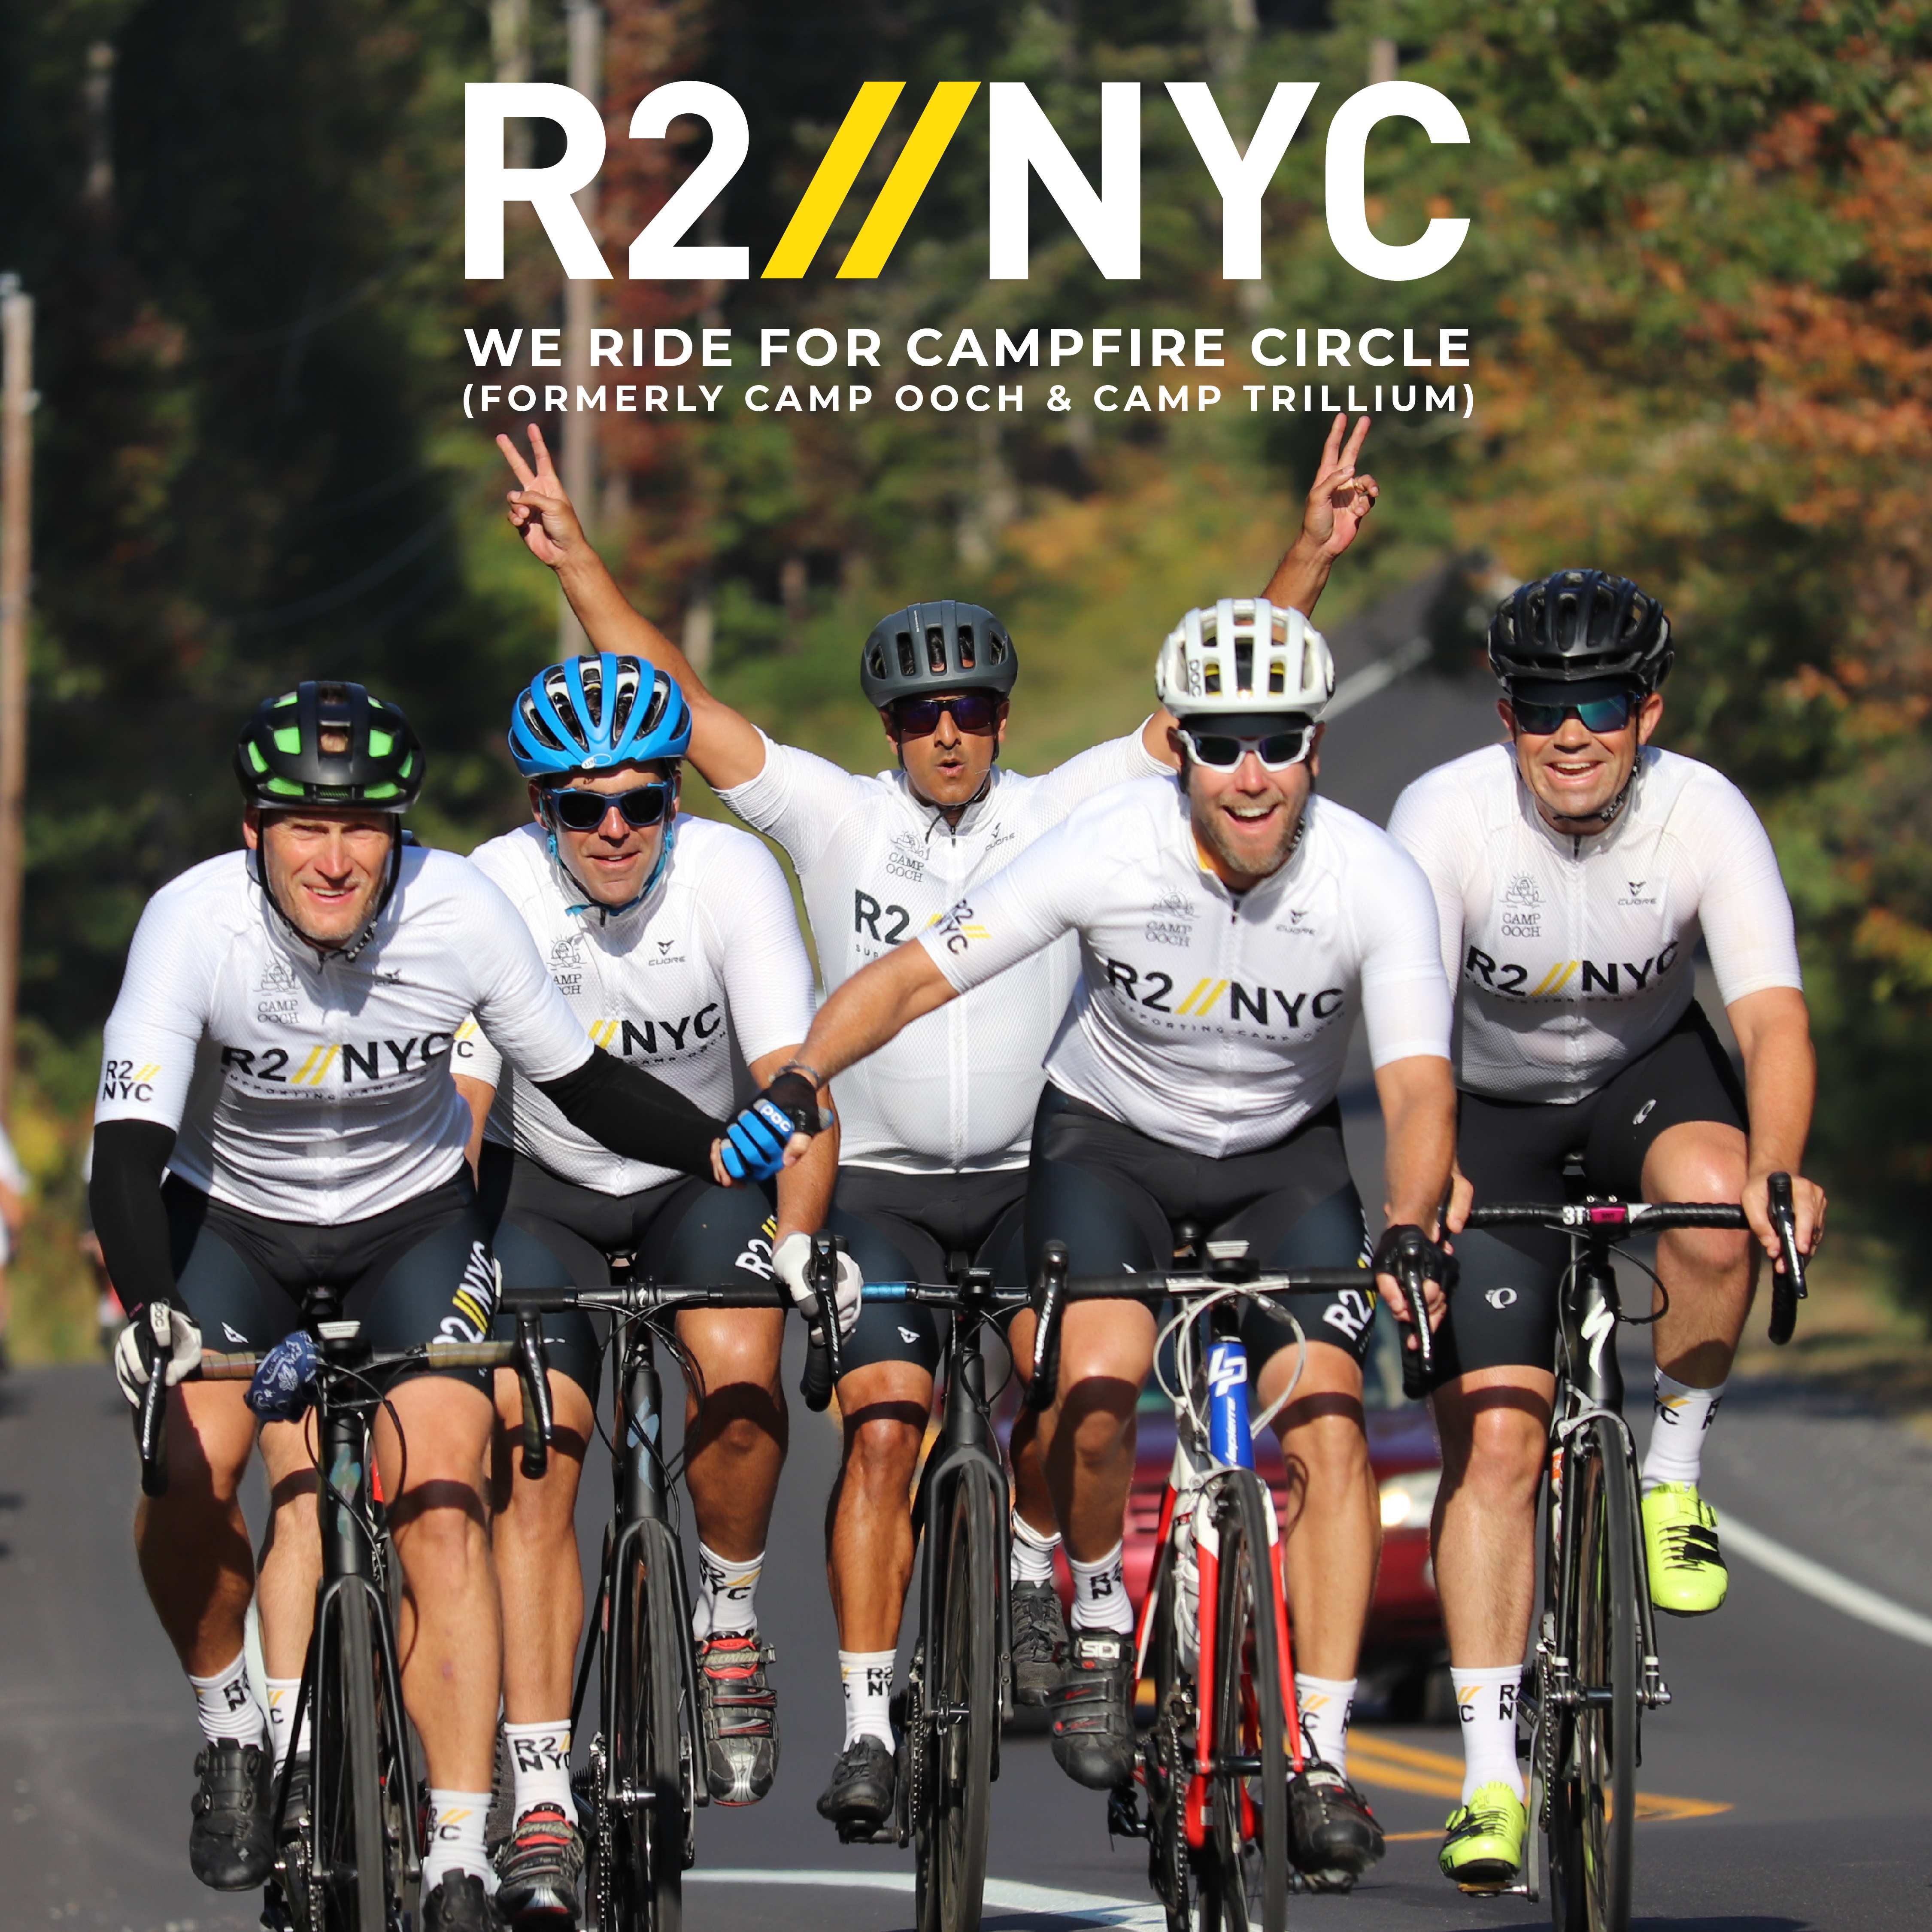 R2NYC We ride for Campfire Circle (Formerly Camp Ooch & Camp Trillium) Five riders on bikes smiling at camera on road with trees in background